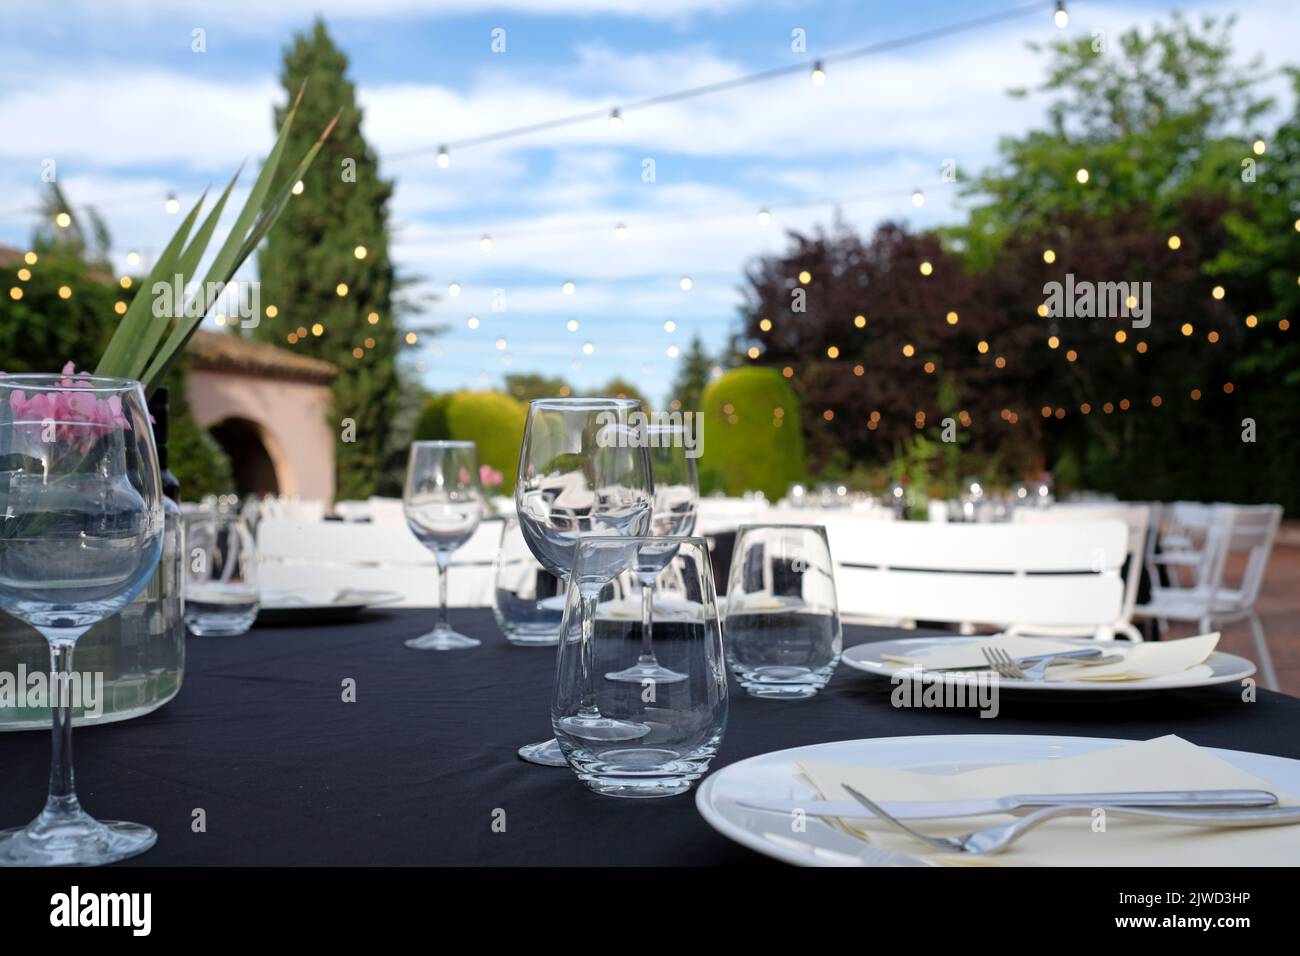 Outdoor venue with dinner tables before event Stock Photo